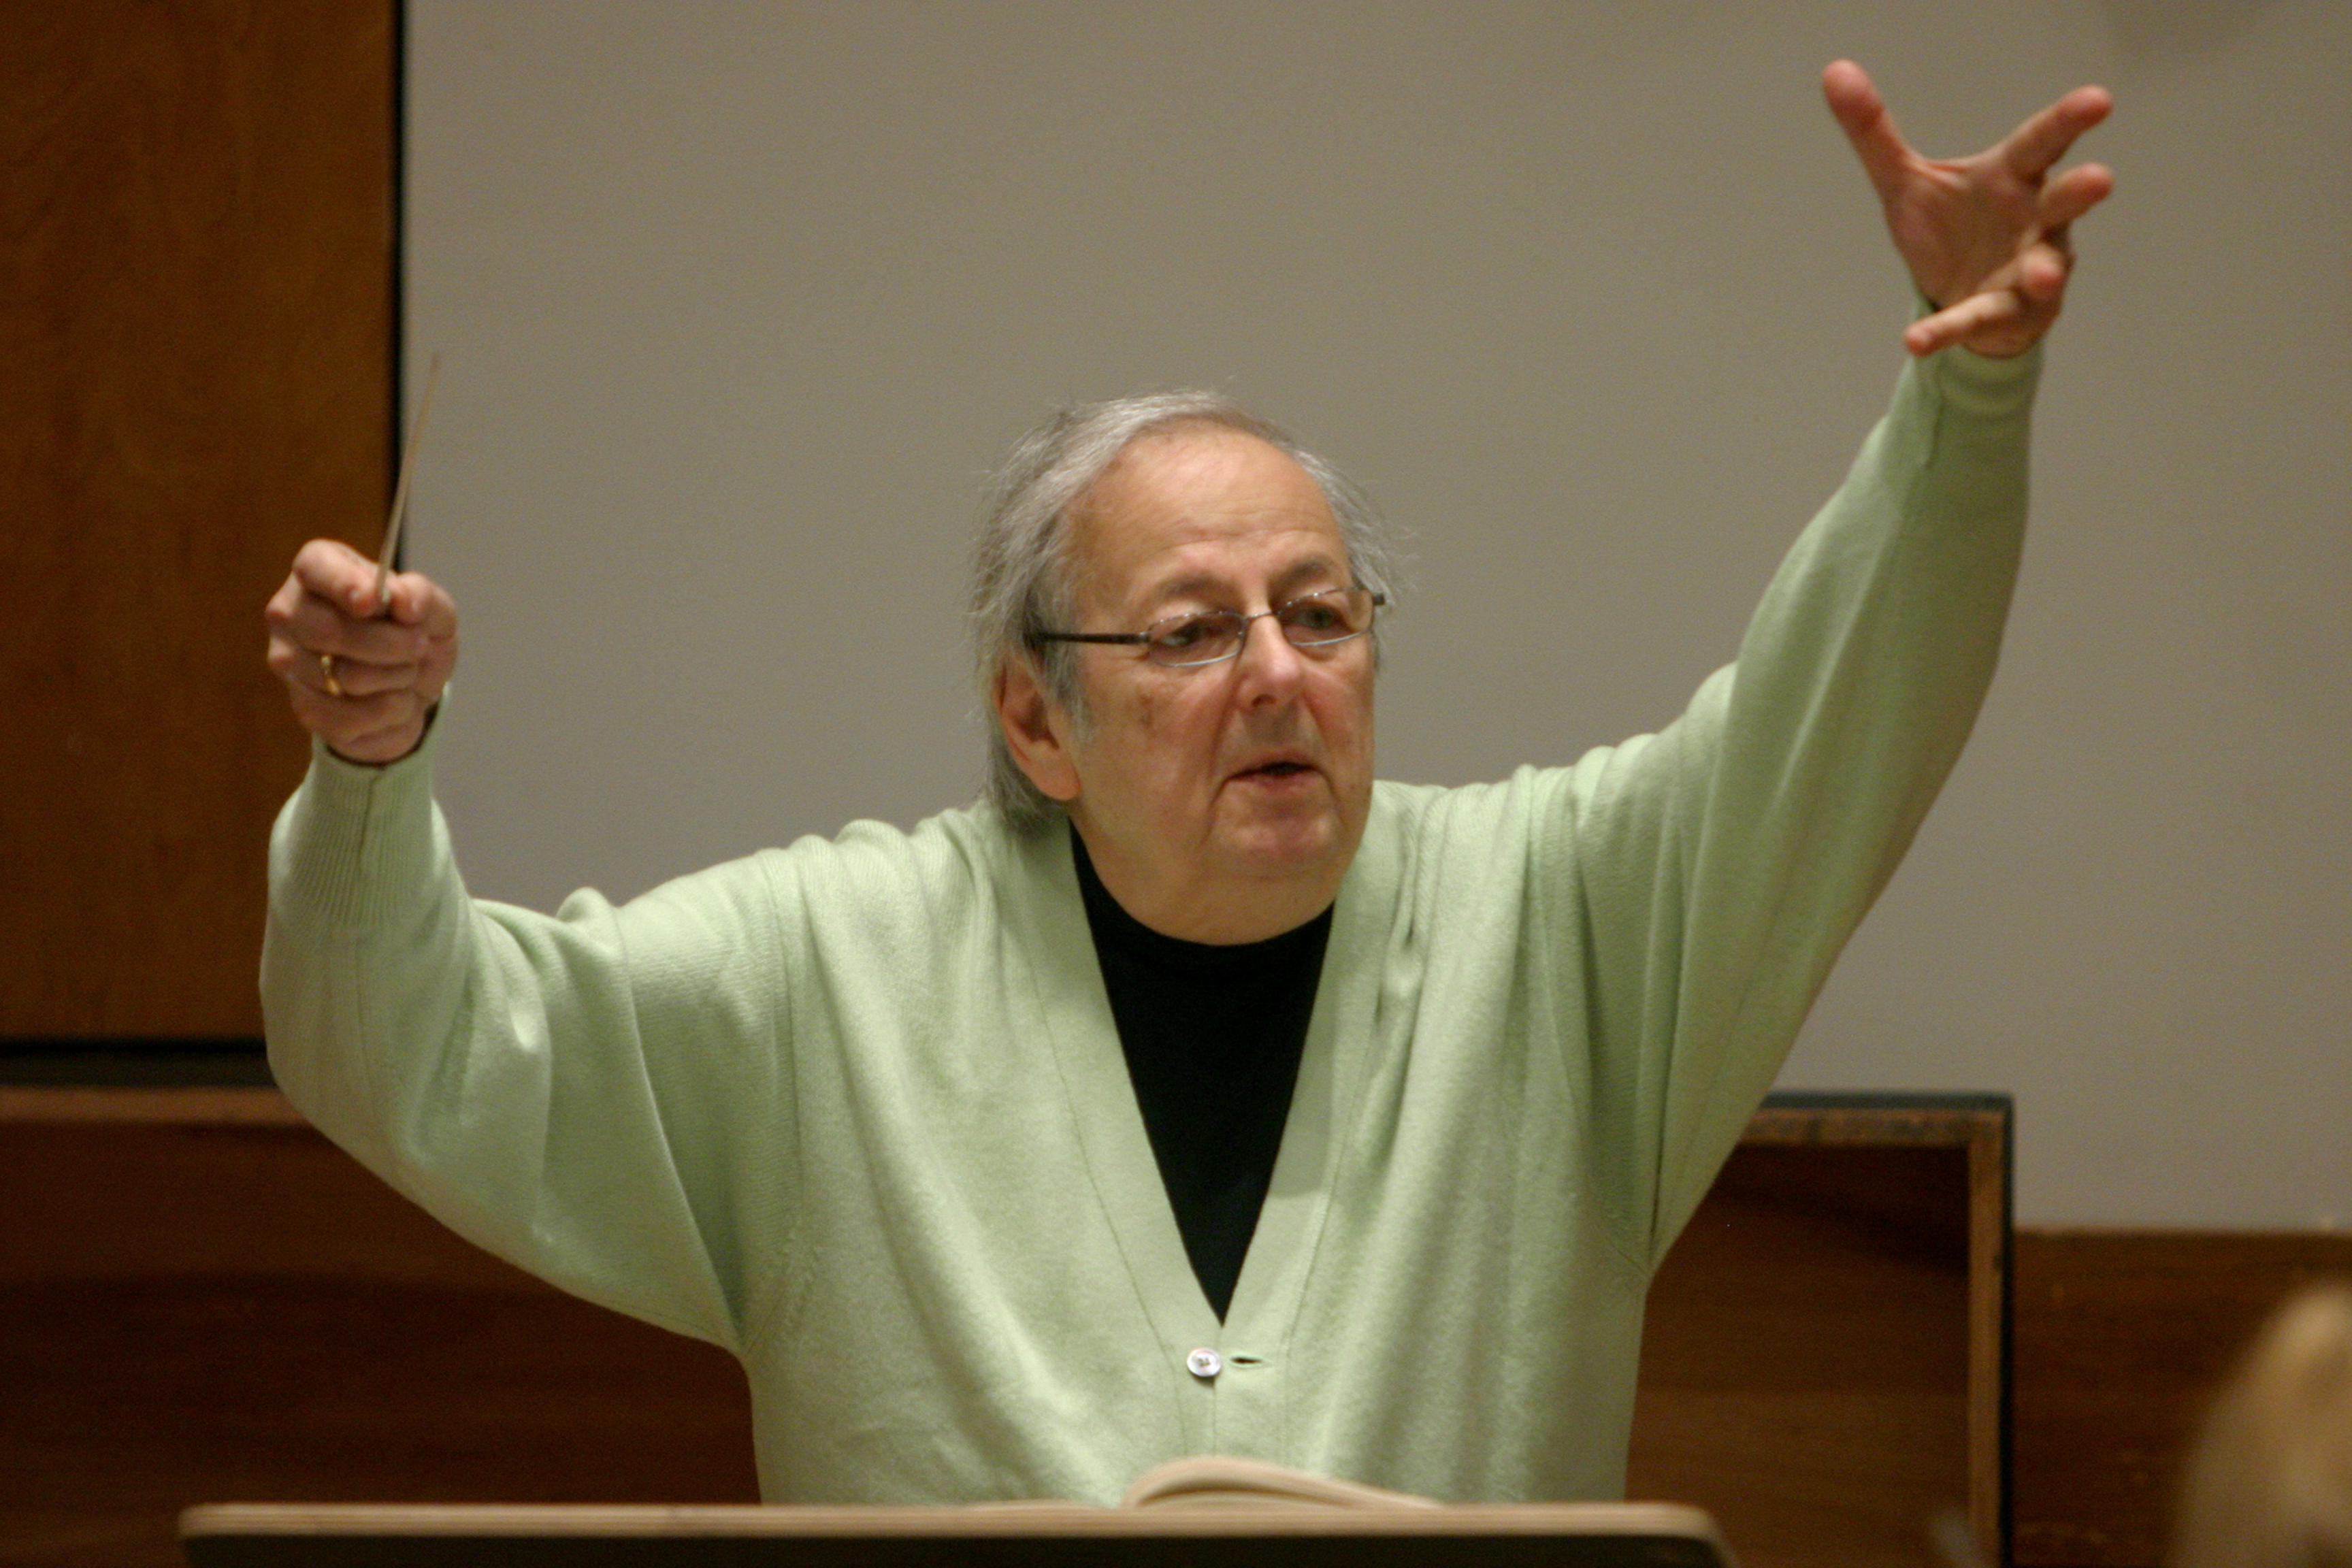 Andre Previn, pictured in 2007, was a composing and conducting legend